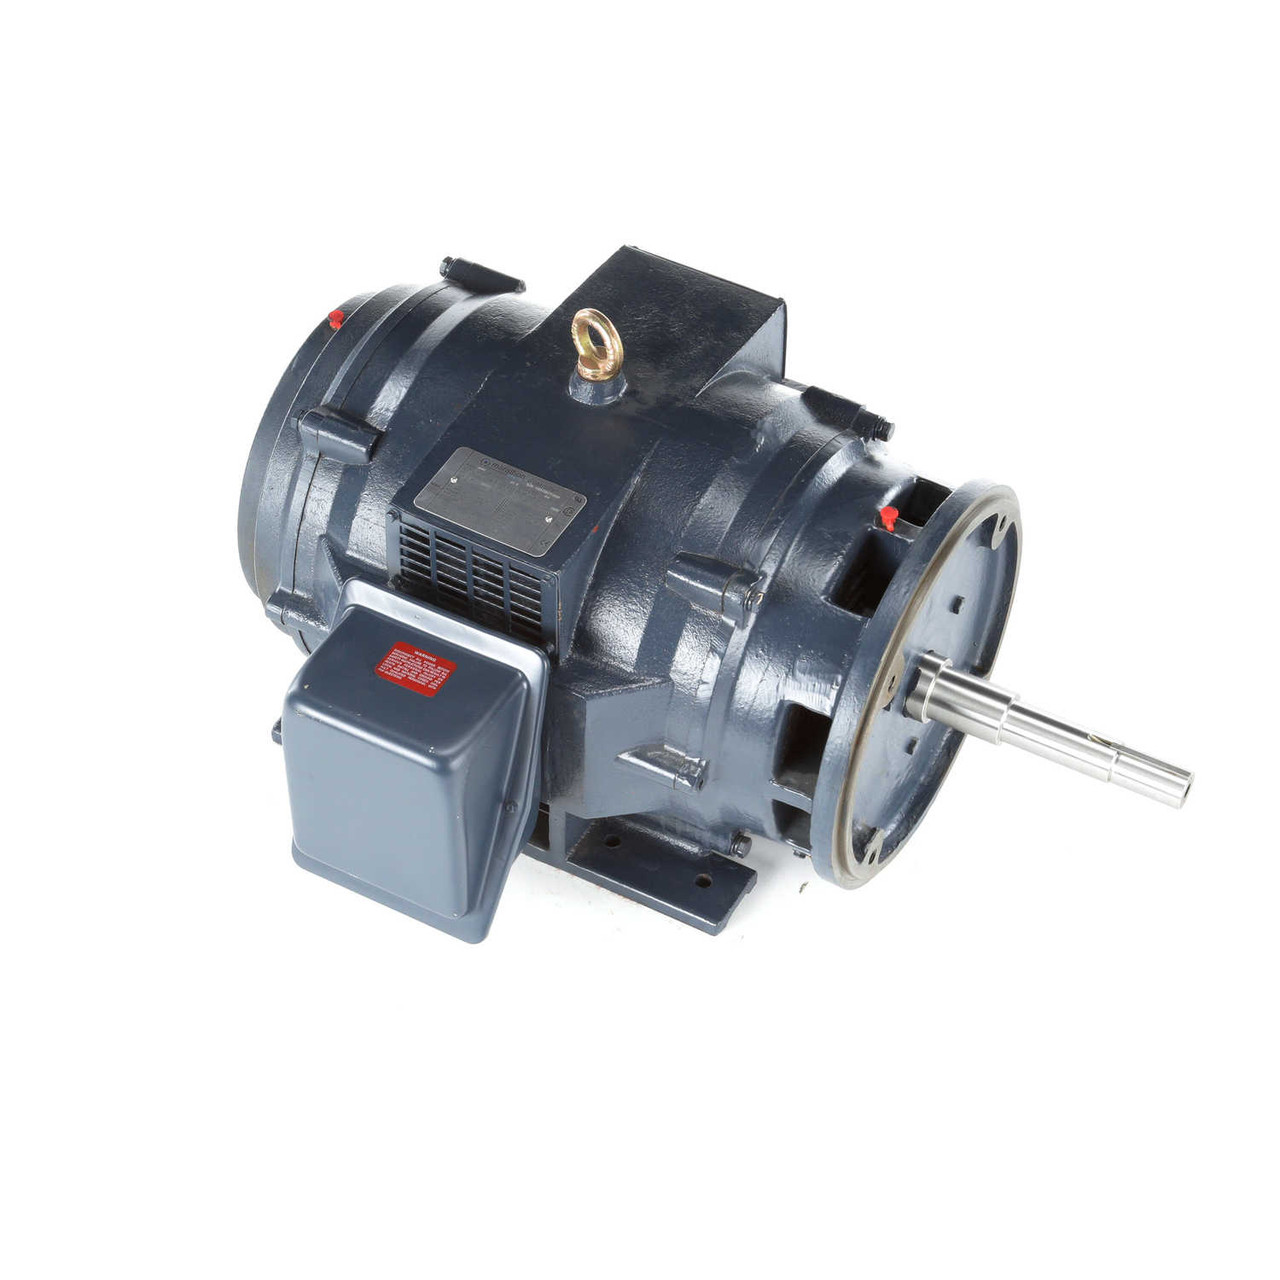 GT2431 JP Close-Coupled Pump Three Phase Dripproof Motor 30 HP